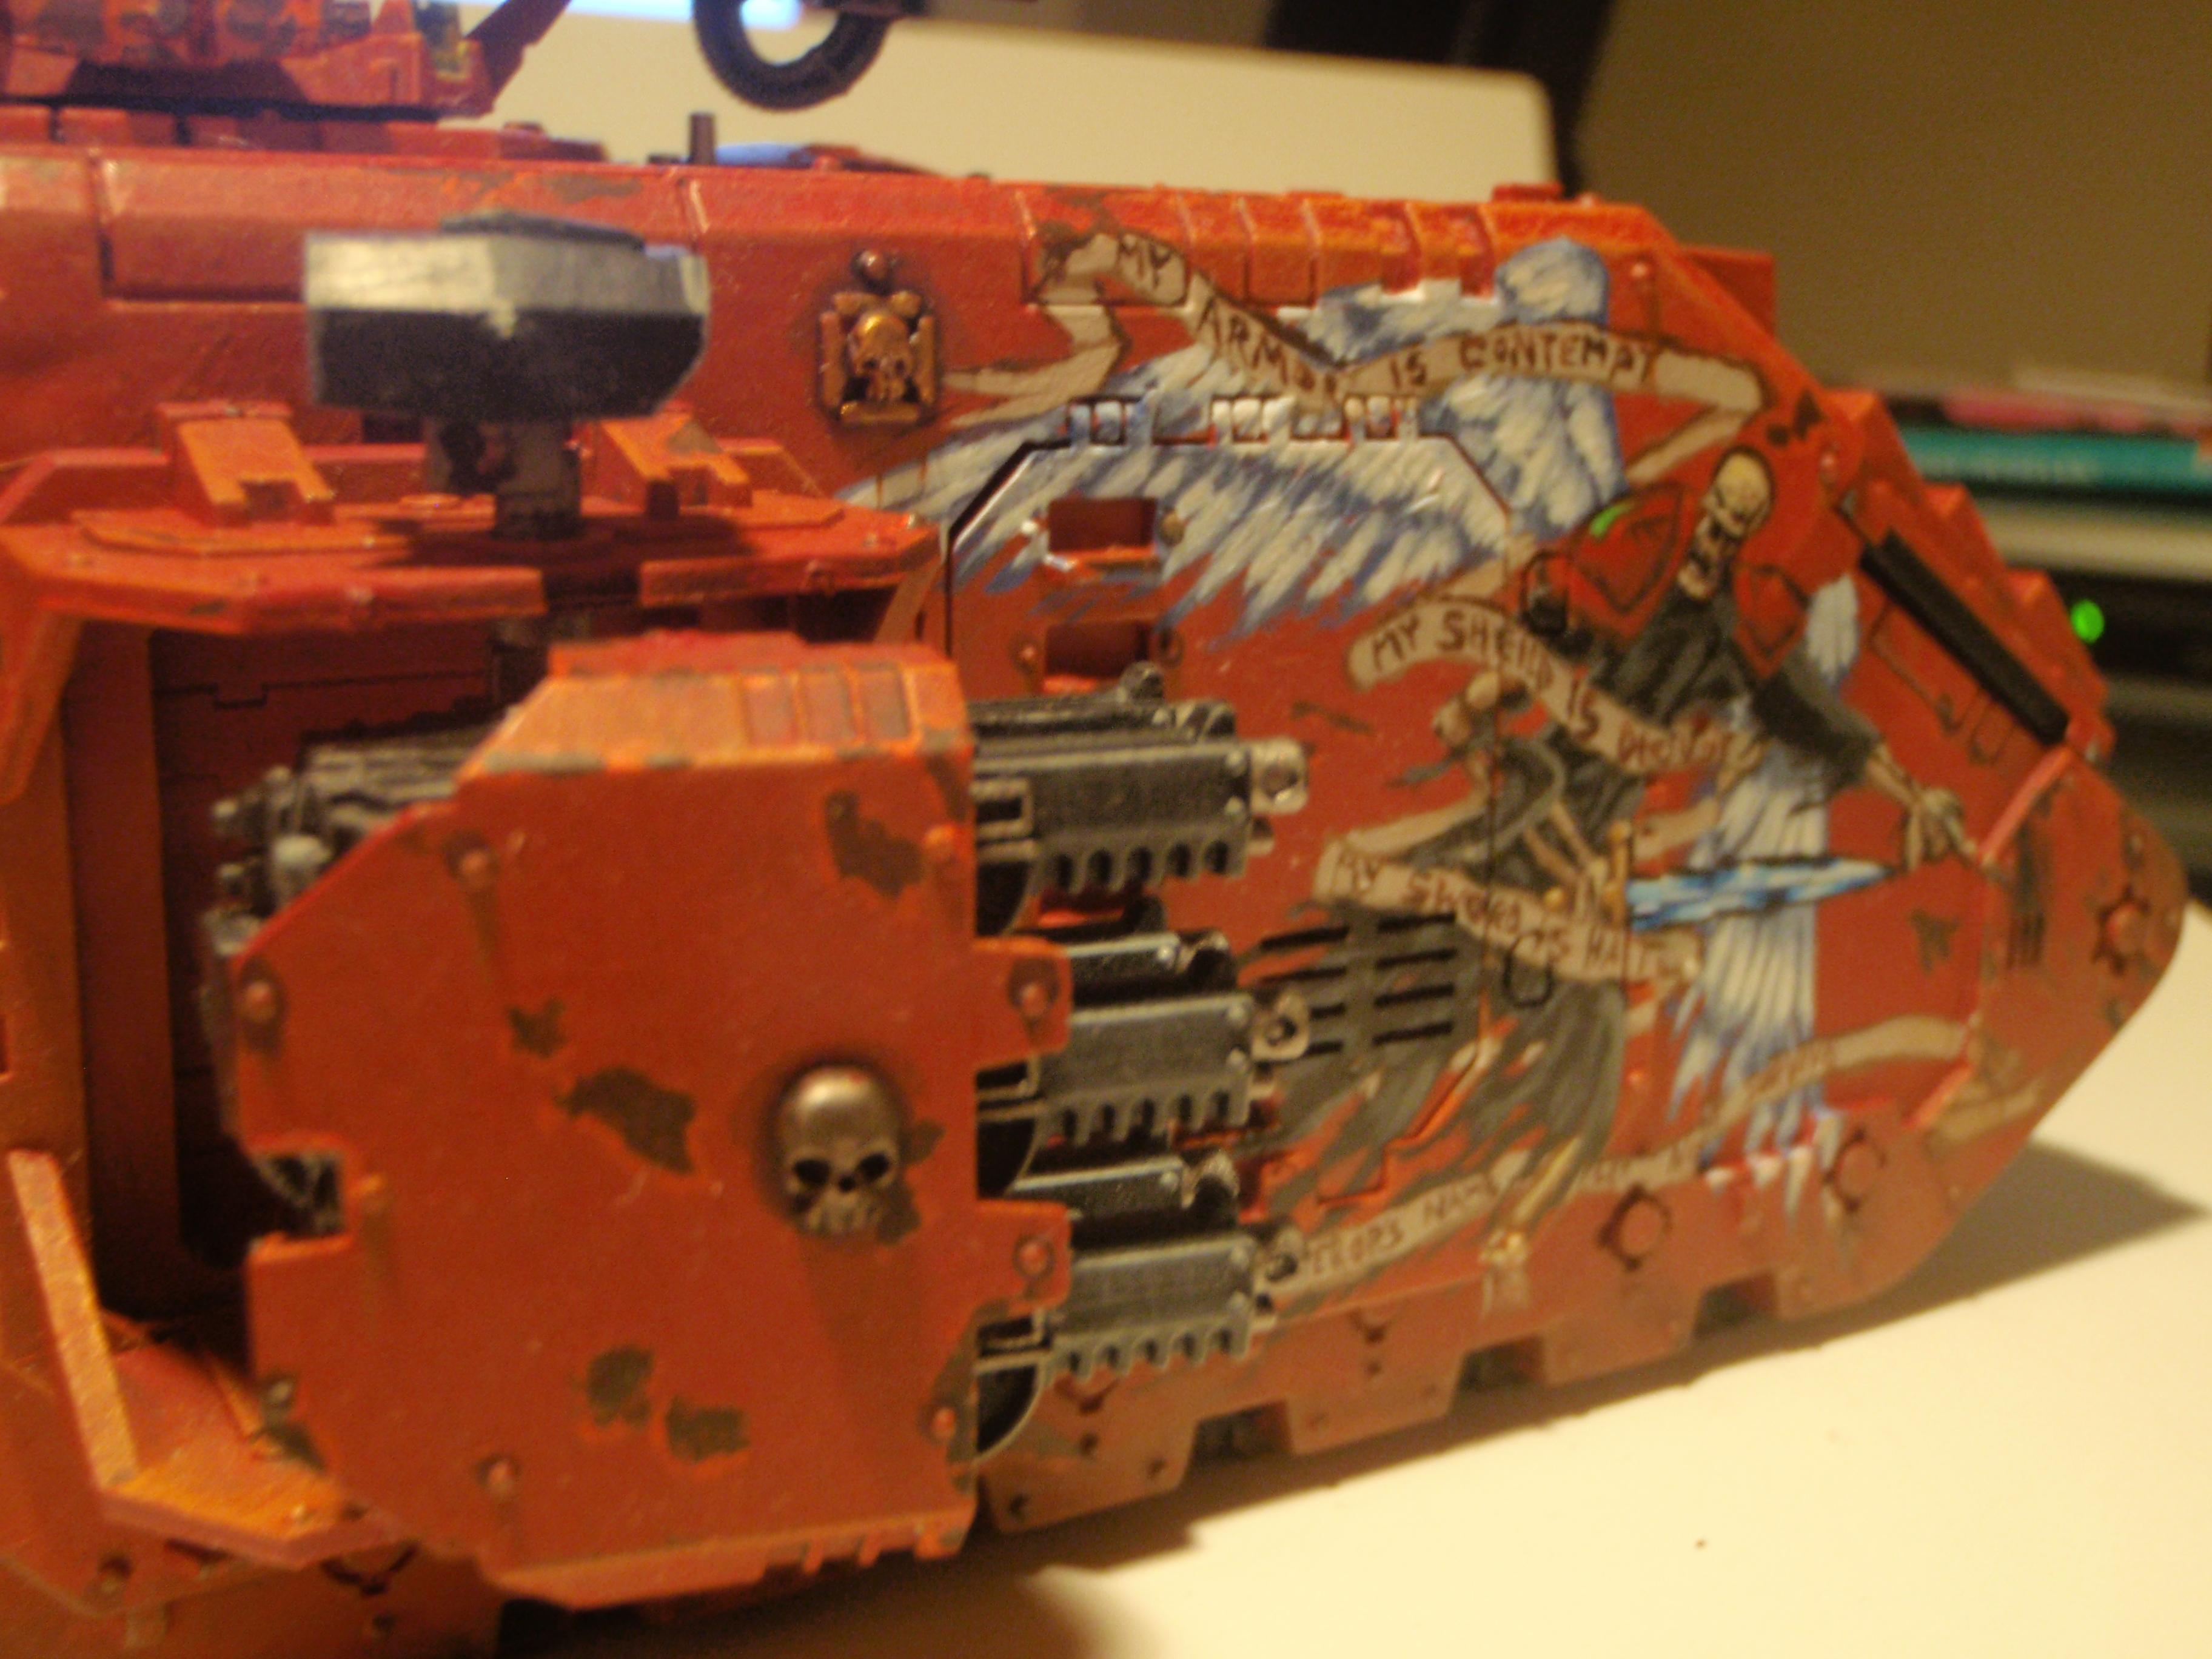 Angel, Artwork, Blood, Blood Angels, Crusader, Death, Dreadnought, Freehand, Imperial, Land Raider, Red, Sanguinious, Space Marines, Tank